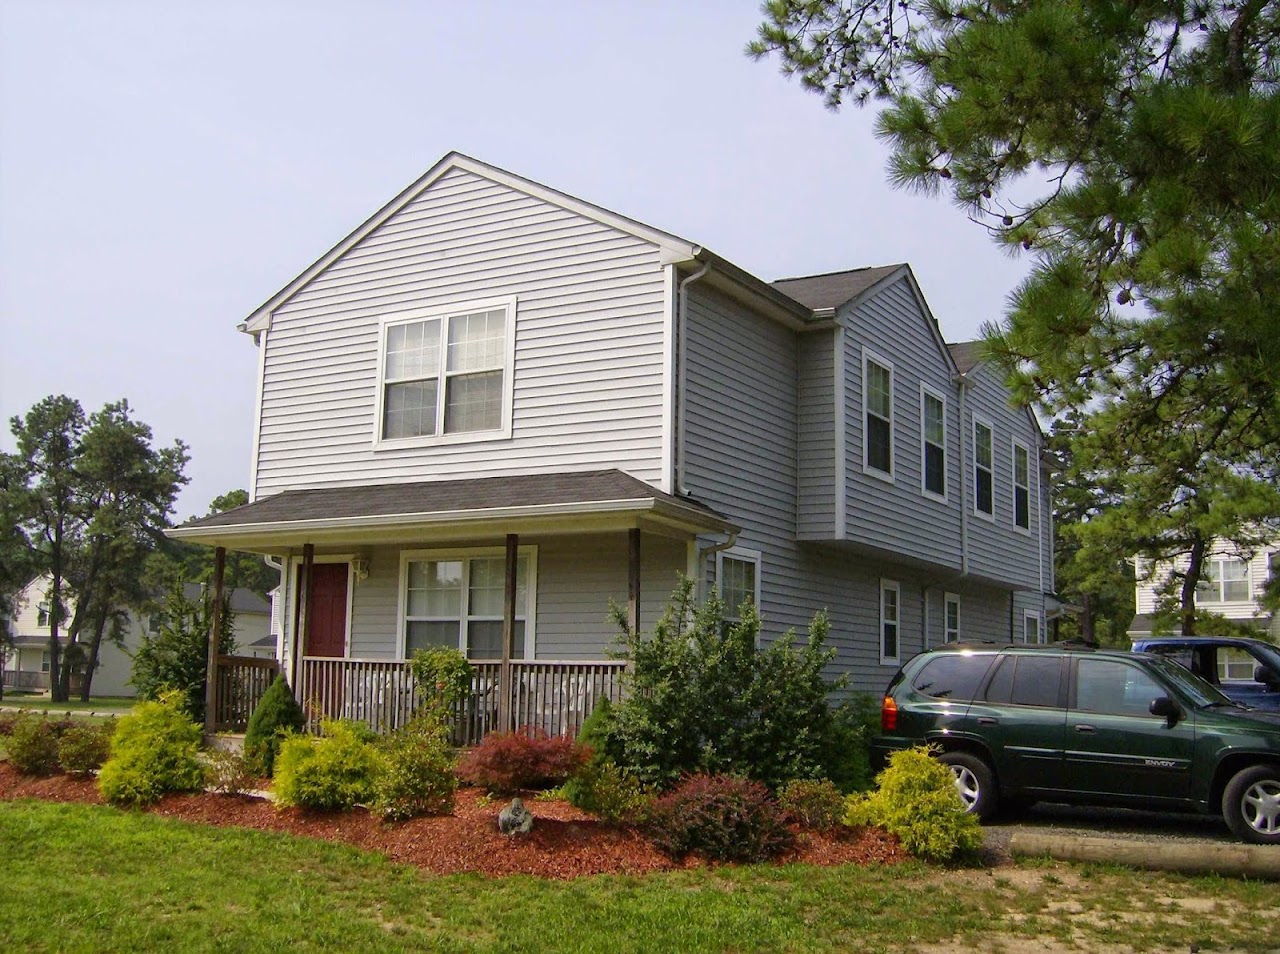 Photo of BECKERVILLE APARTMENTS. Affordable housing located at 202 MANOR DRIVE MANCHESTER TWP, NJ 08759